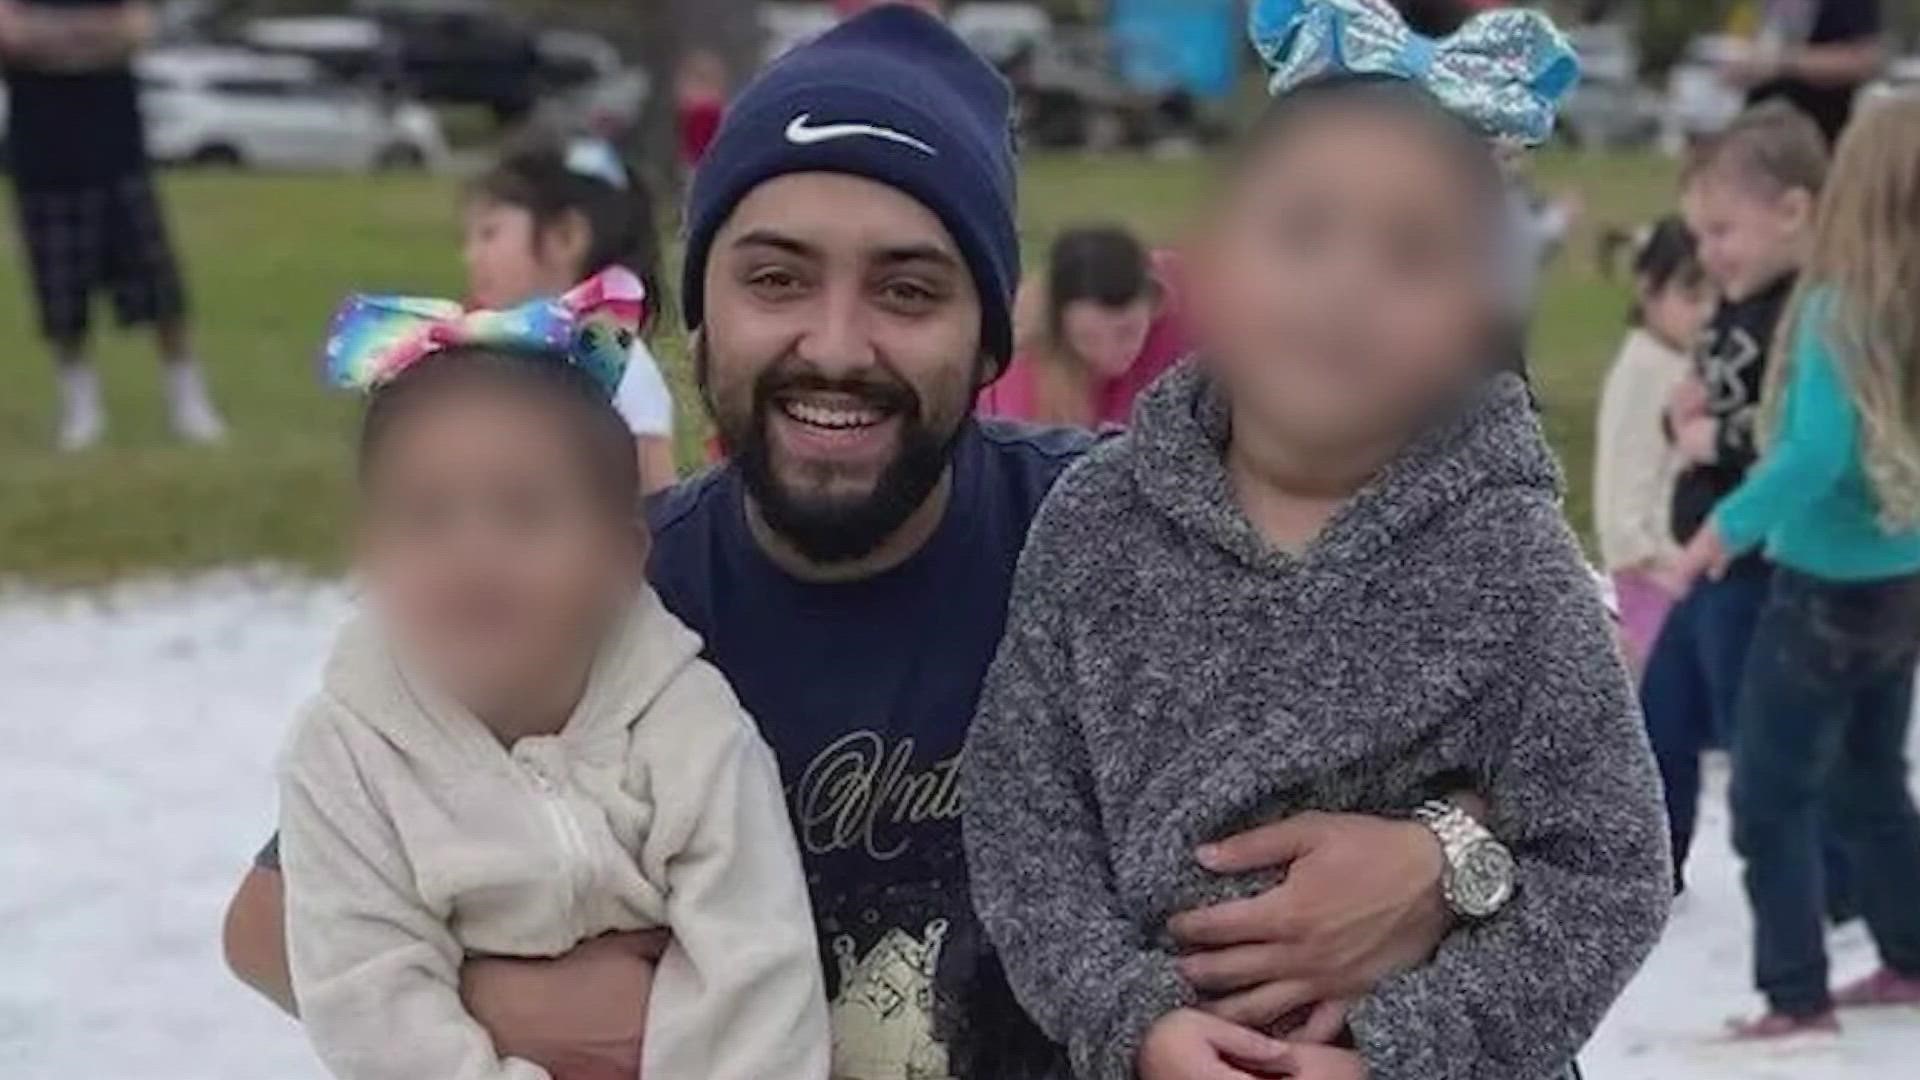 A 24-year-old father was shot and killed as he walked into the restaurant to celebrate his 6-year-old daughter's birthday.